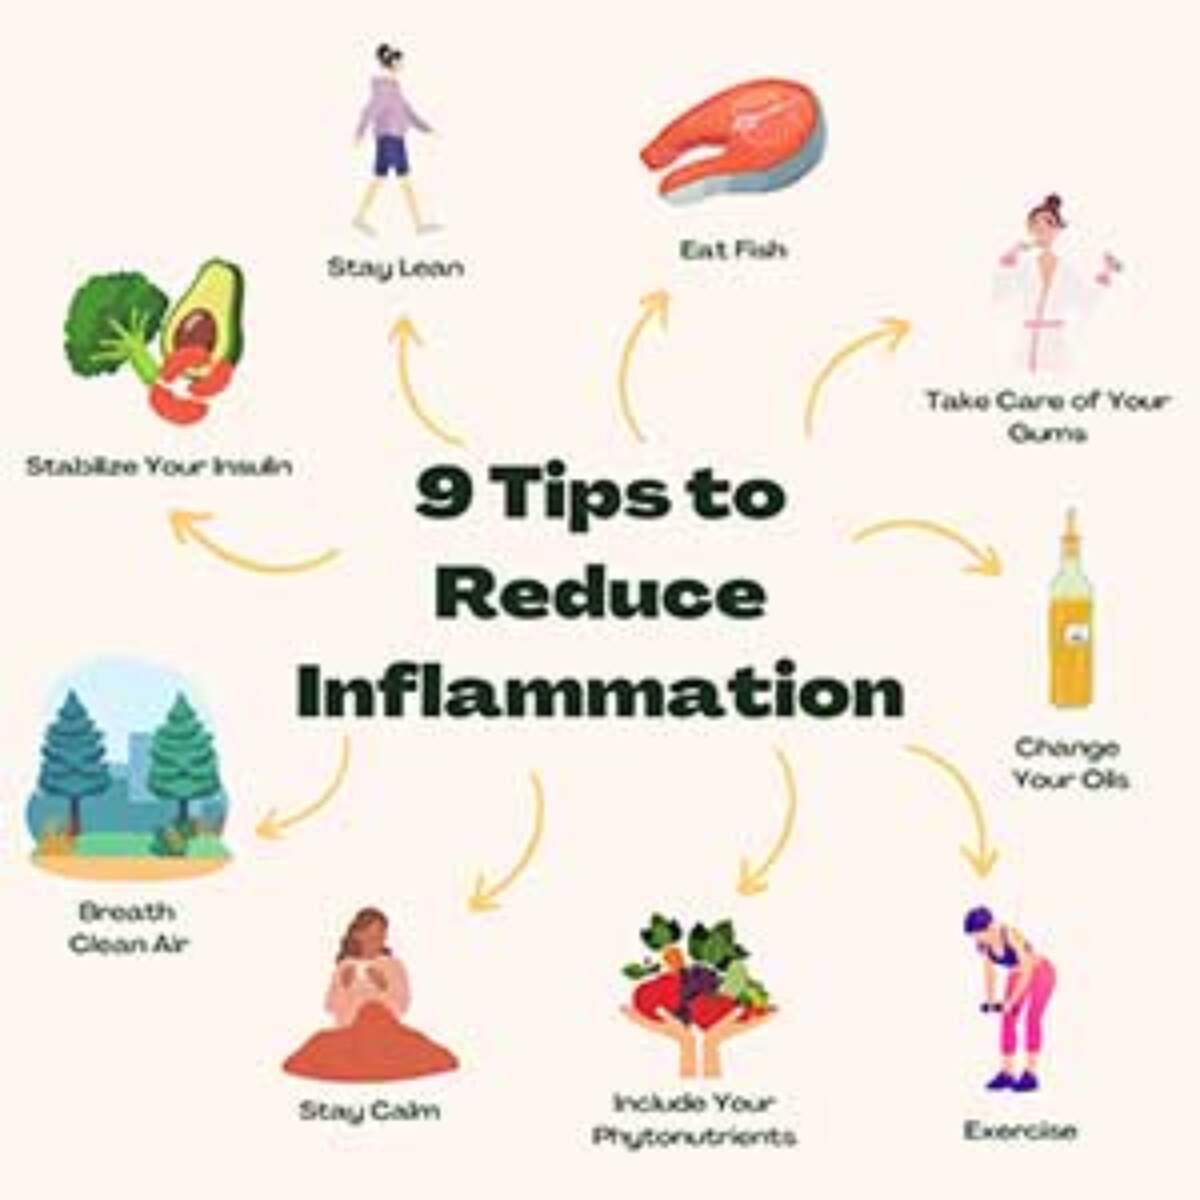 Exercise and inflammation reduction